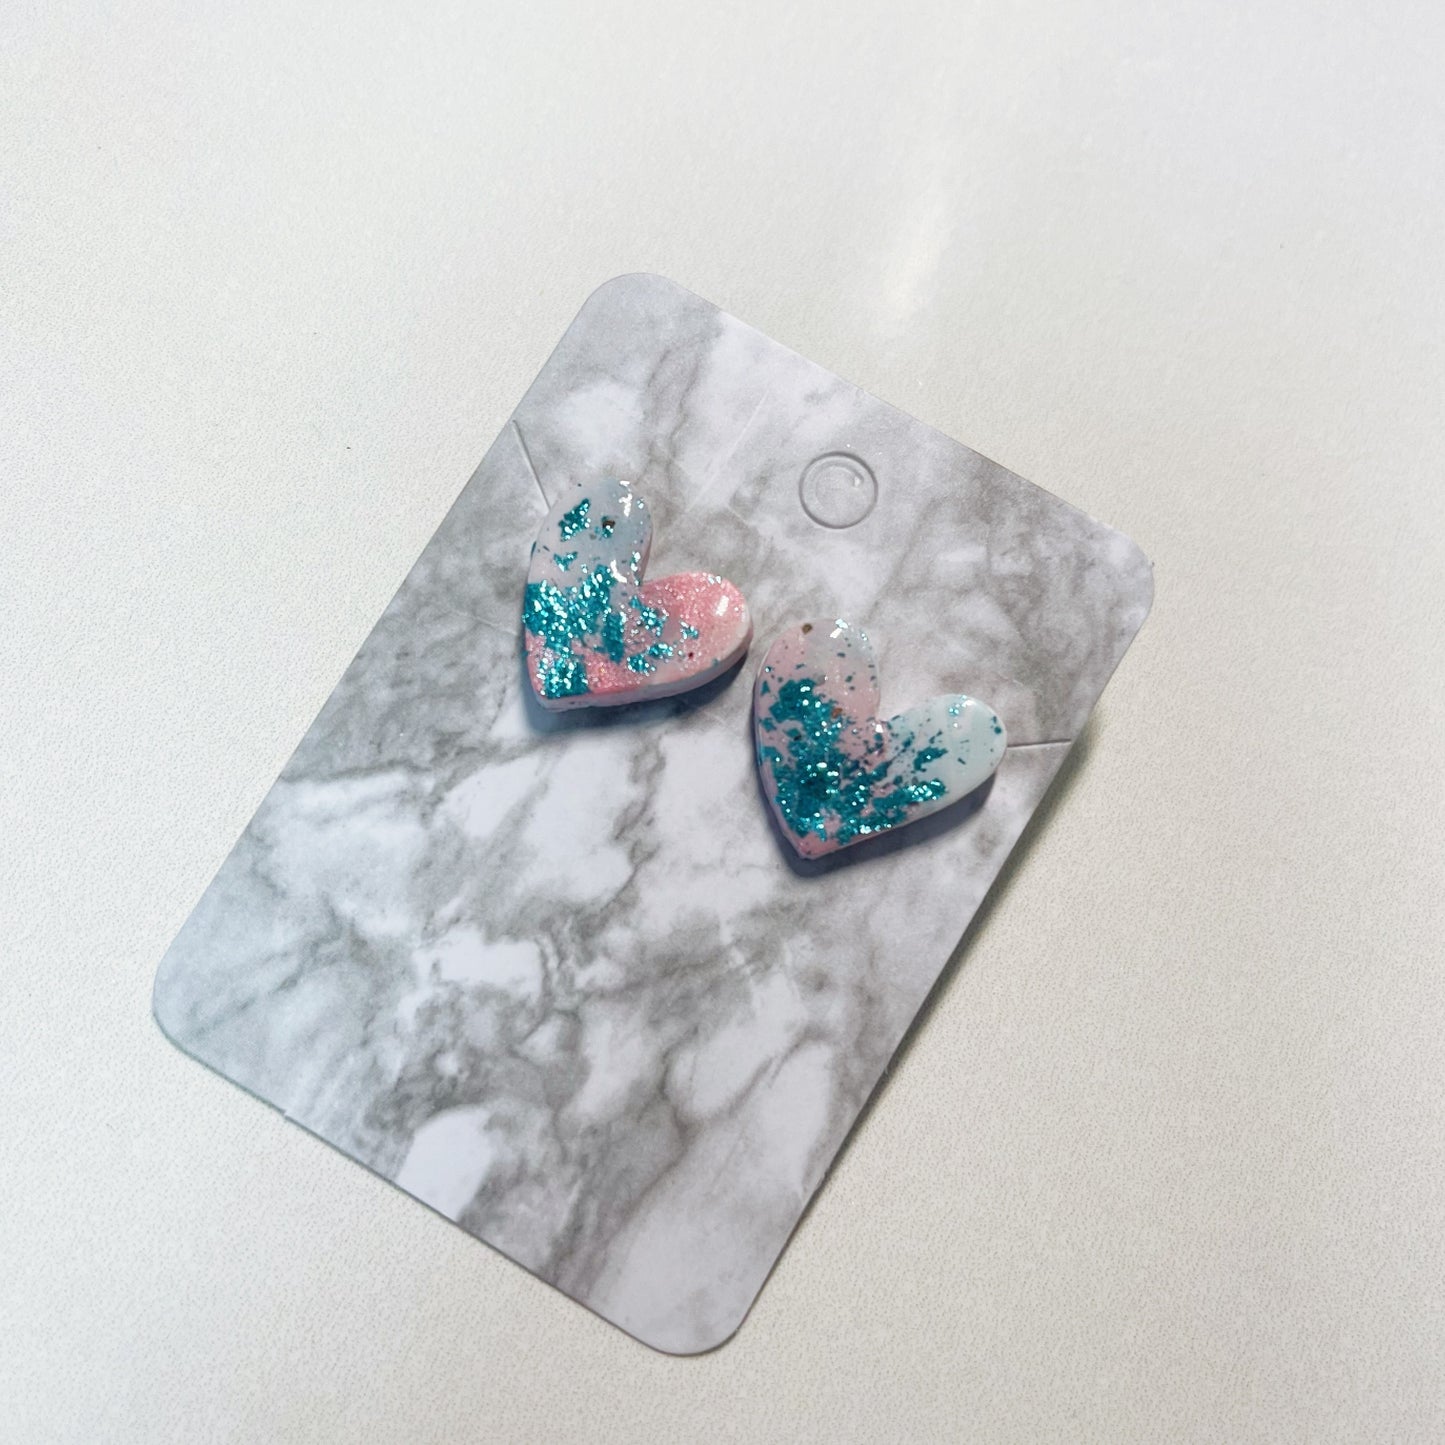 Cotton Candy Earrings $18